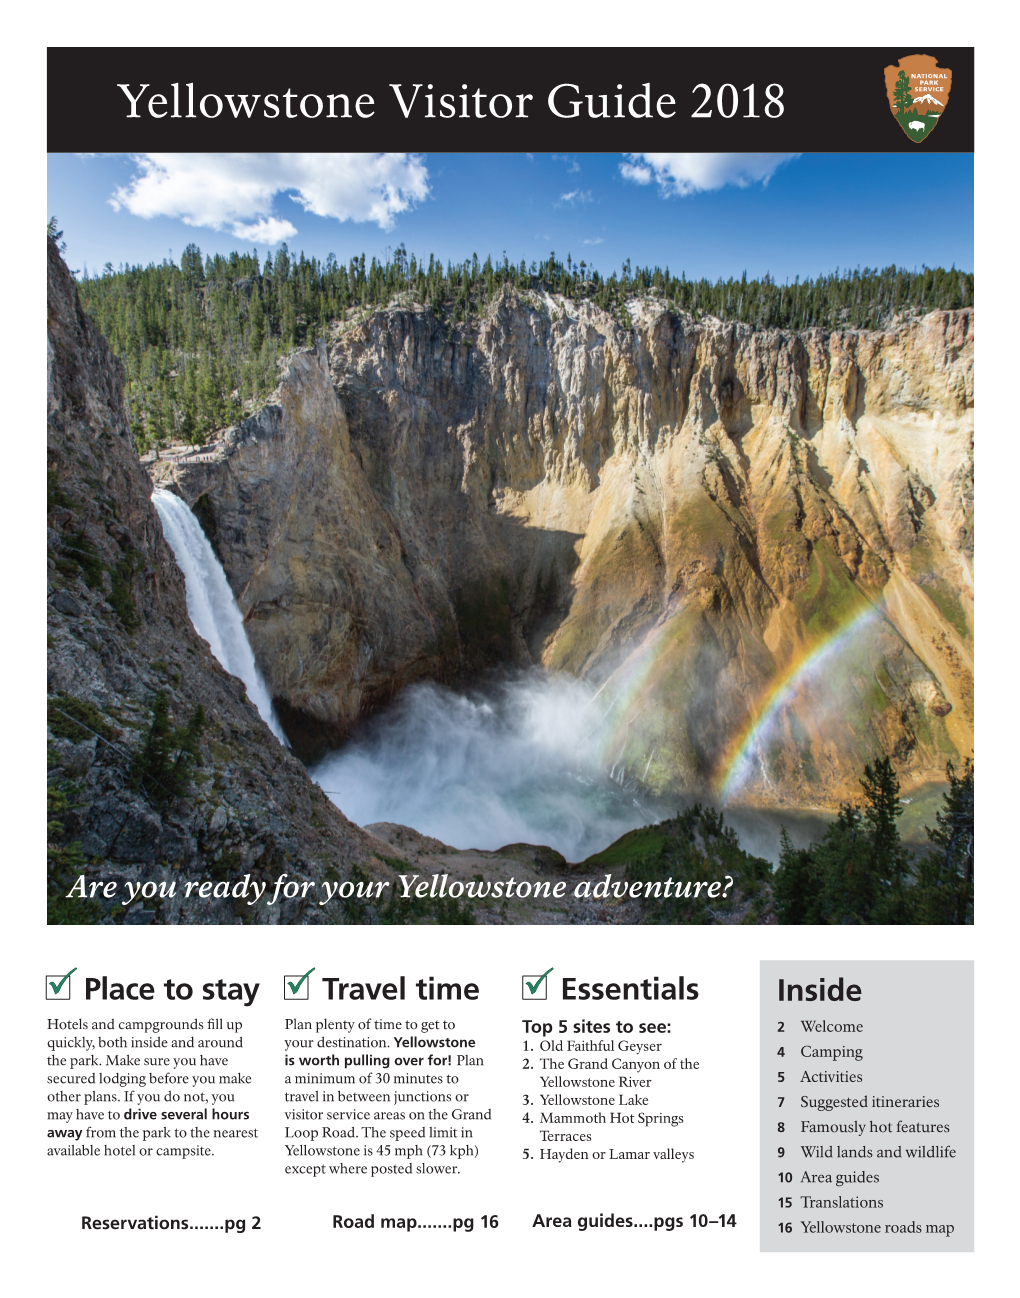 Yellowstone Visitor Guide 2018